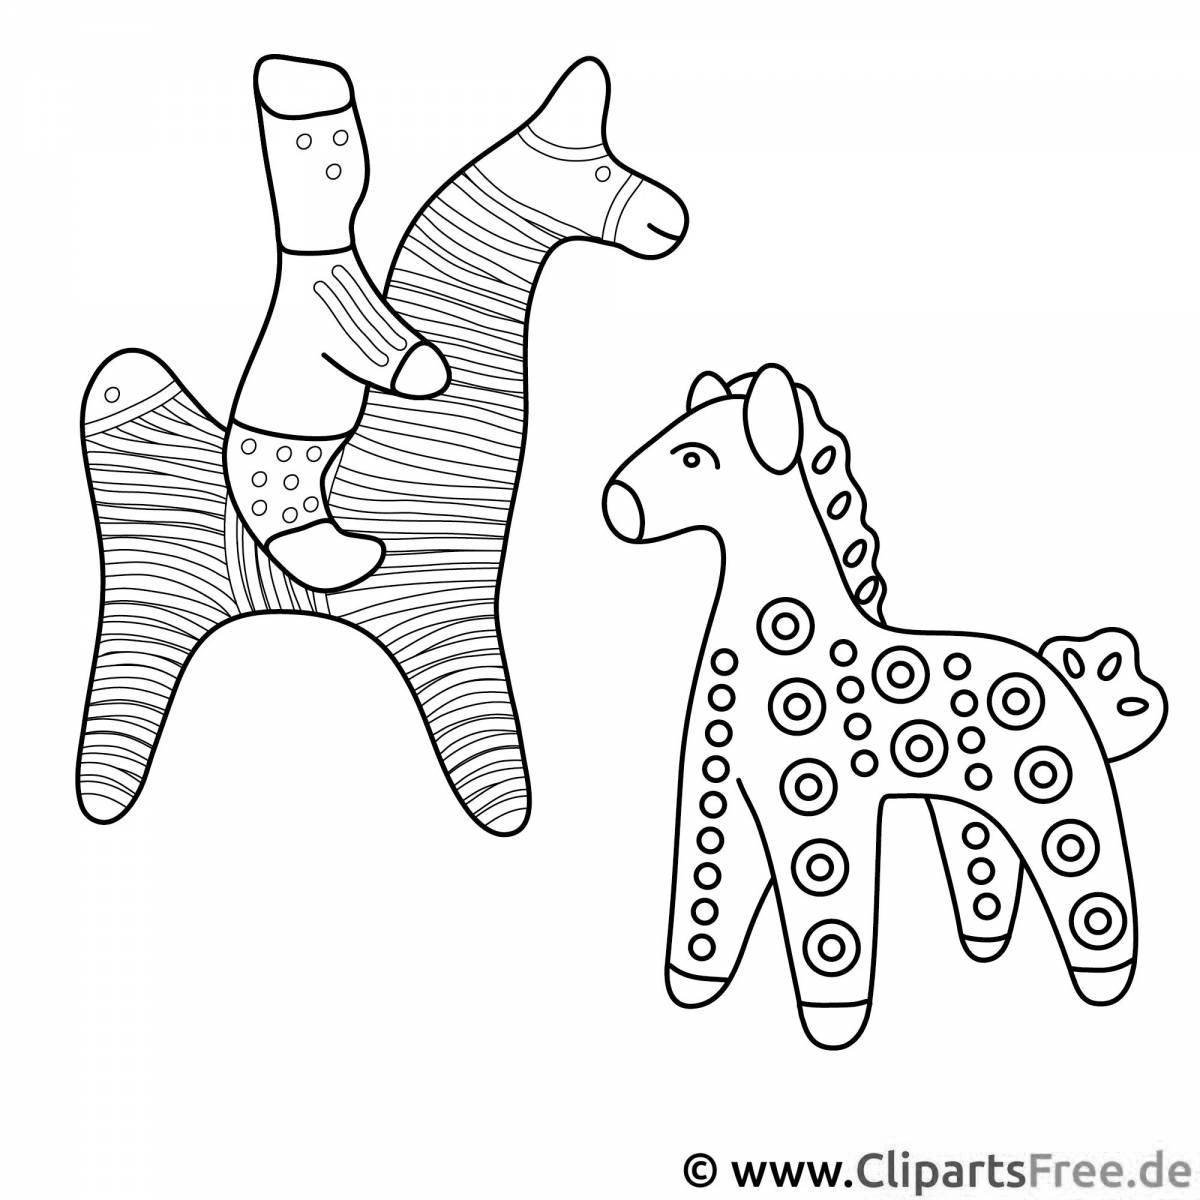 Coloring for a bright horse for a Dymkovo toy